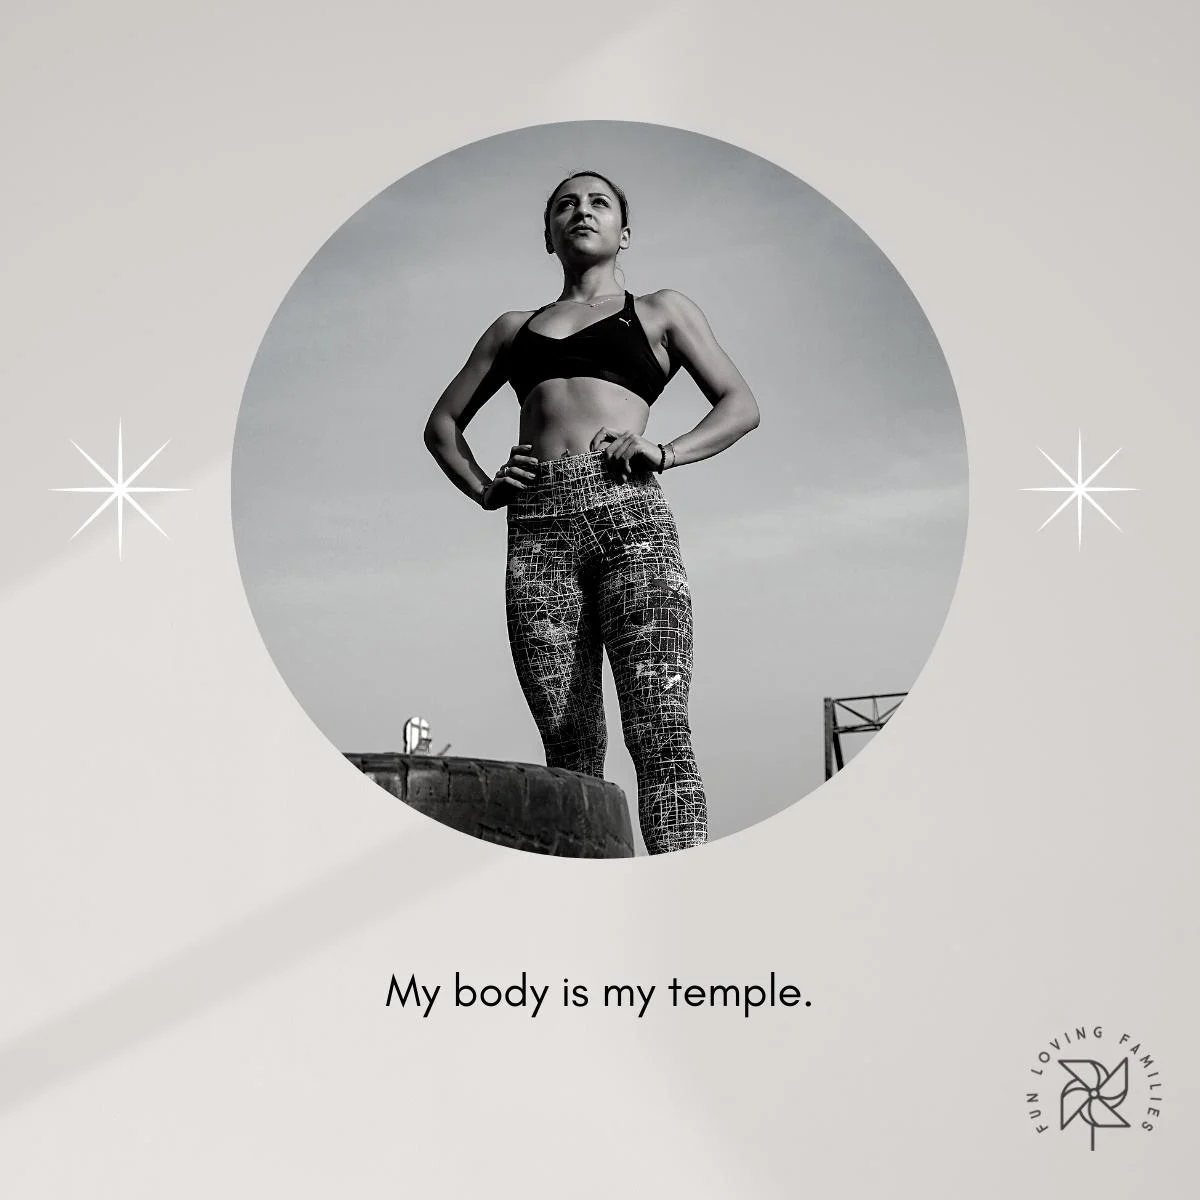 My body is my temple affirmation